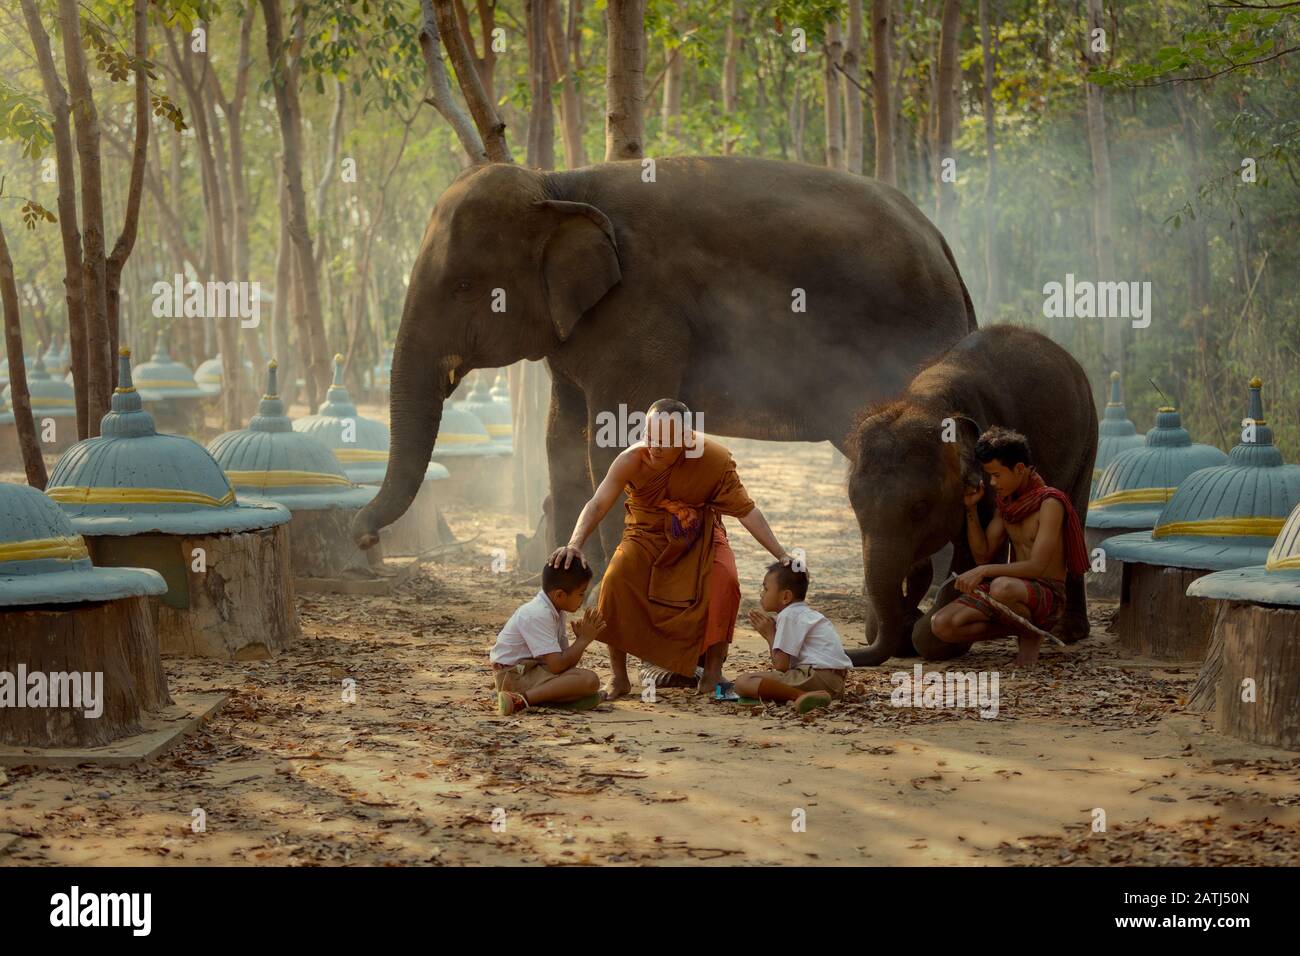 The monk and children enjoy in elephants park at Surin Thailand. Stock Photo